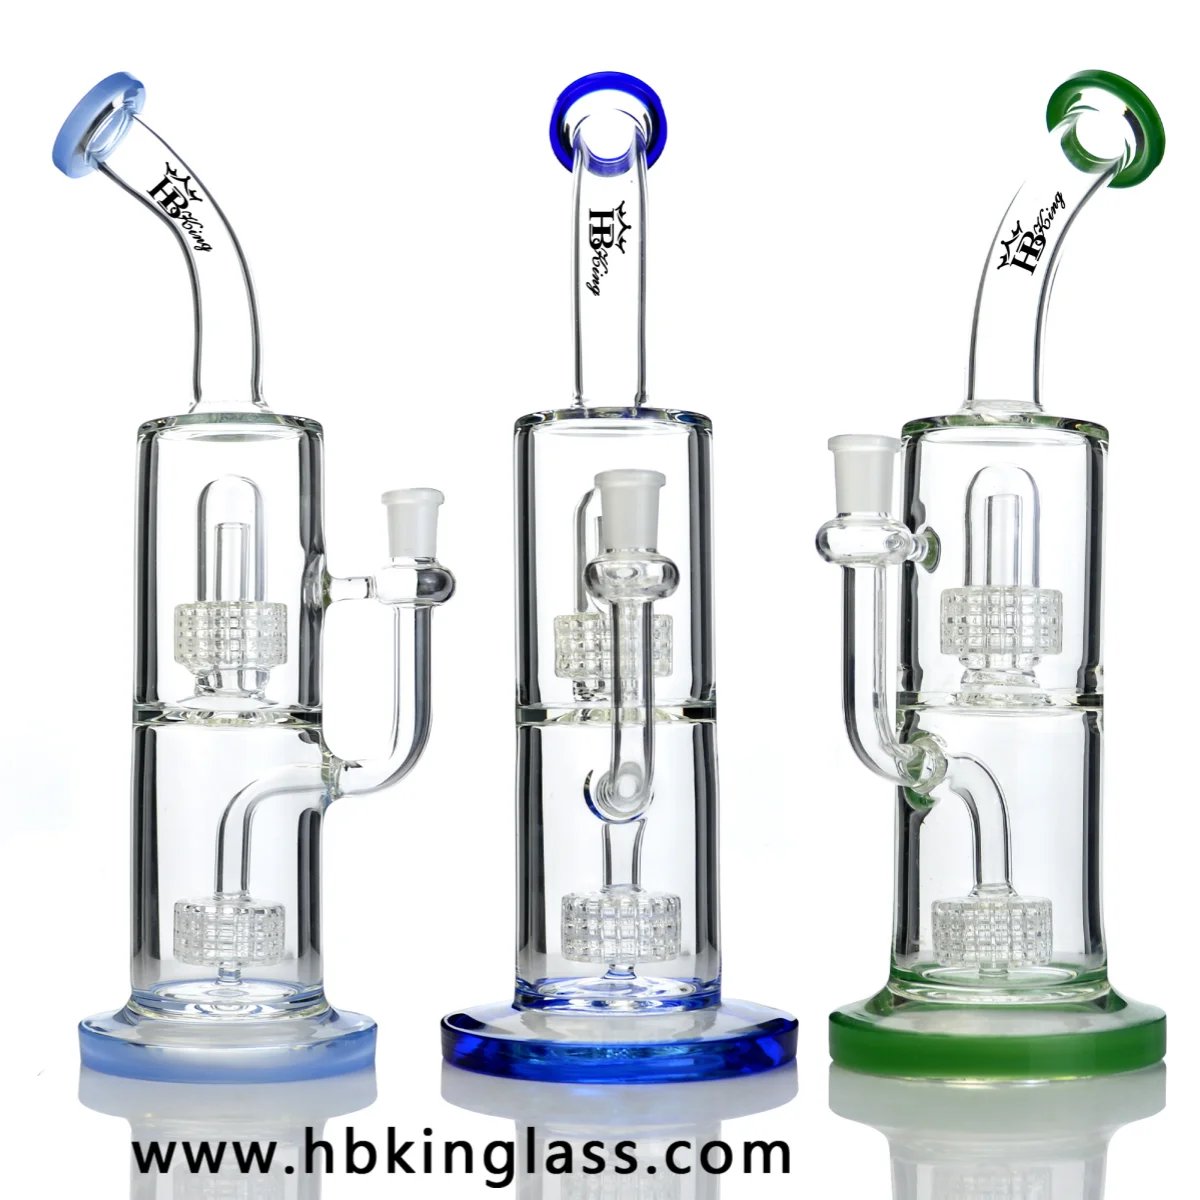 There are 3 Double Matrix Perc Bong in different colors